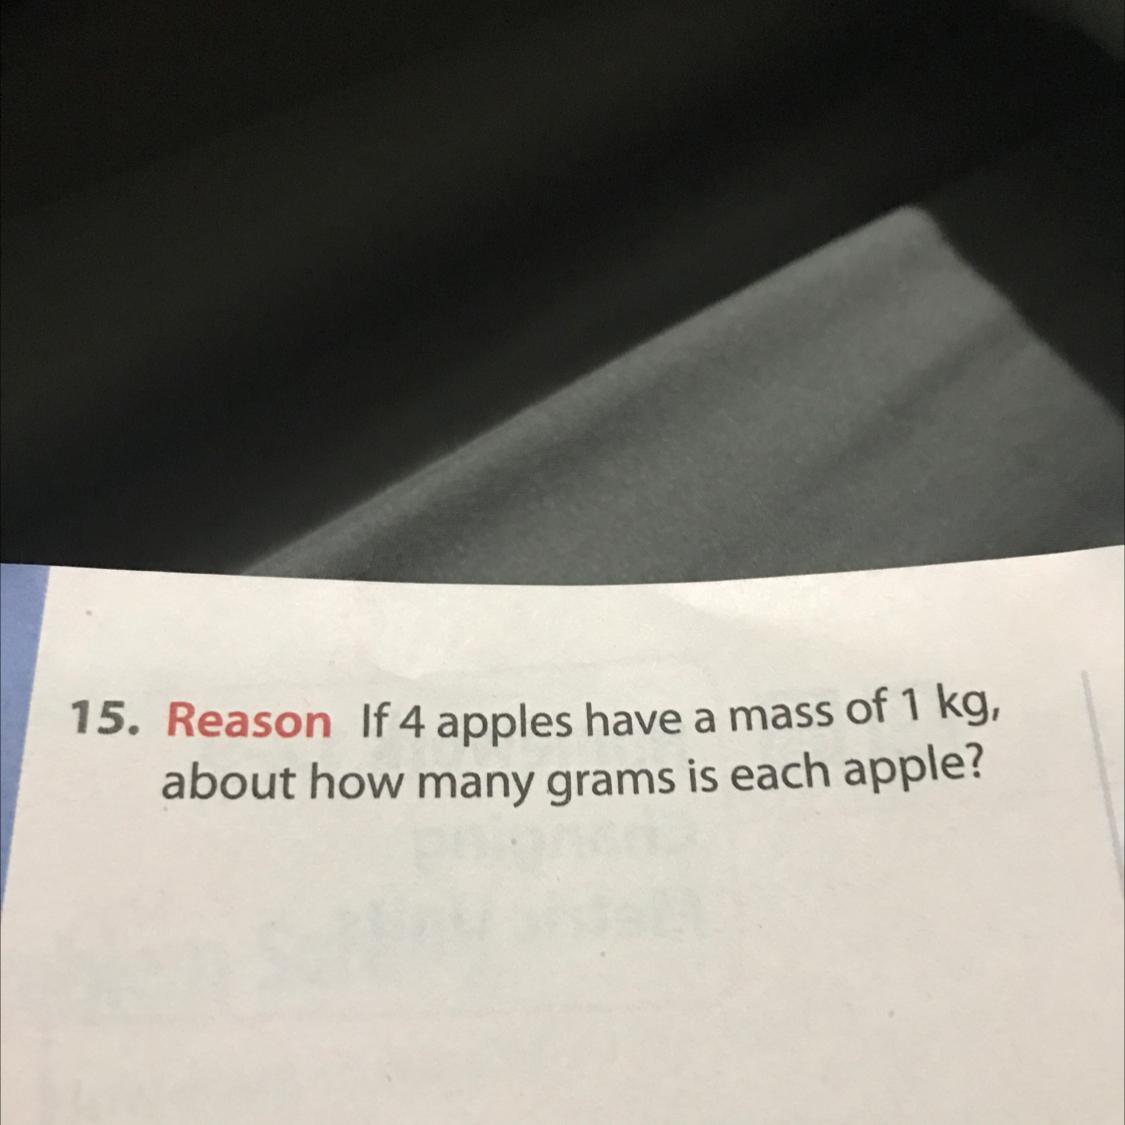 If 4 Apples Have A Mass Of 1 Kg About How Many Grams Is Each ApplePLEASE I NEED HELP